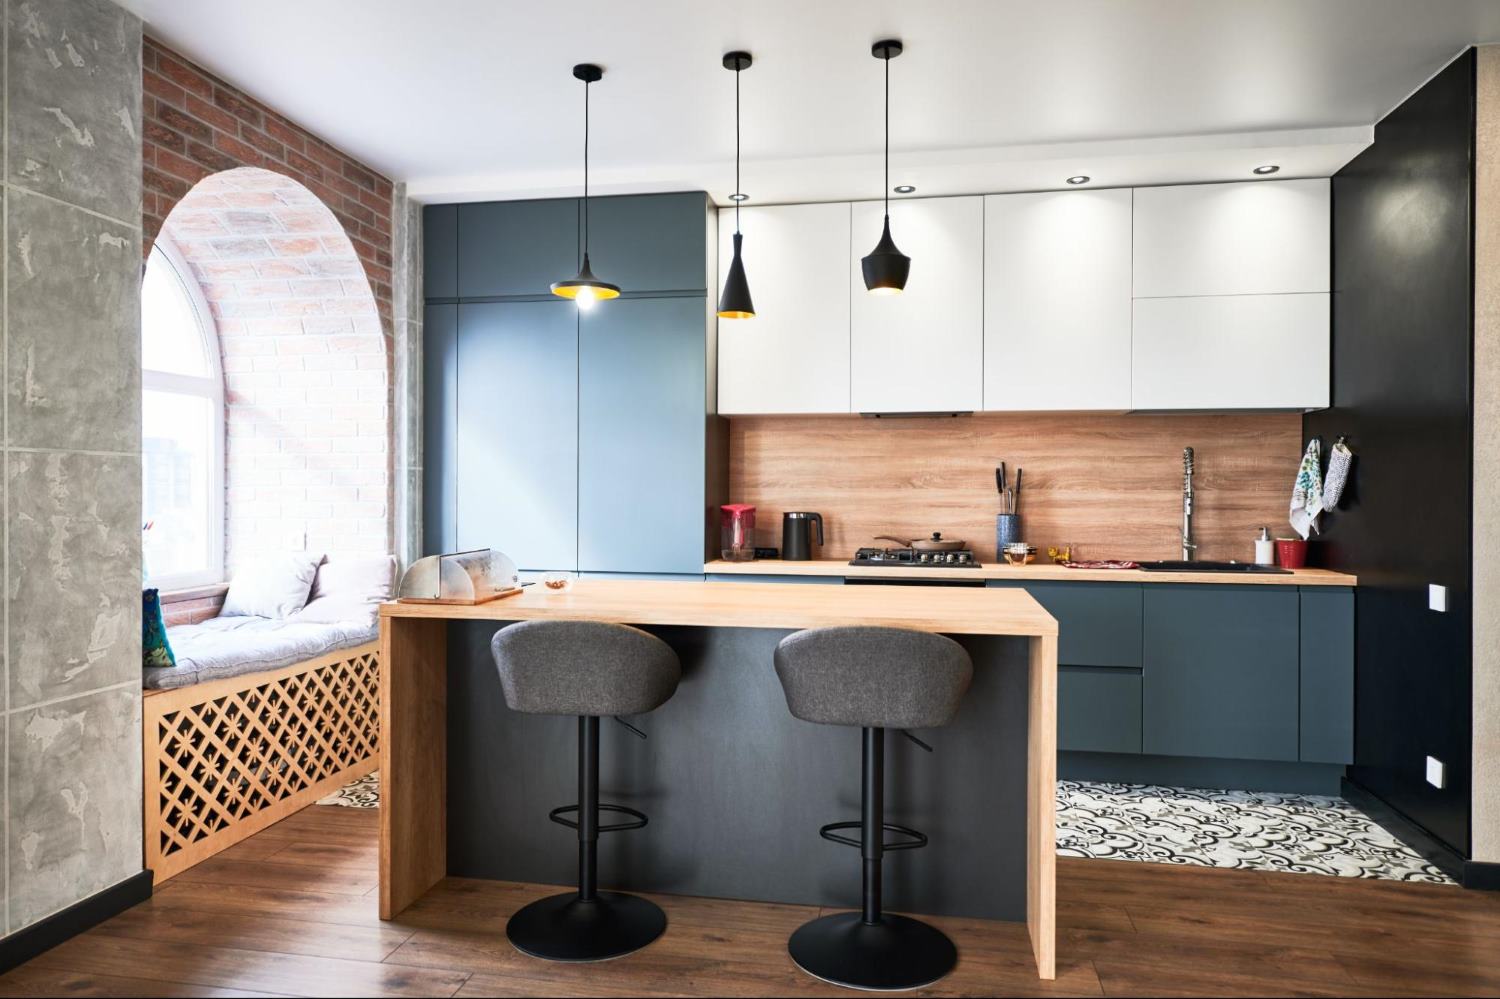 Small Navy Blue and Wooden Countertop in a Modern Kithchen